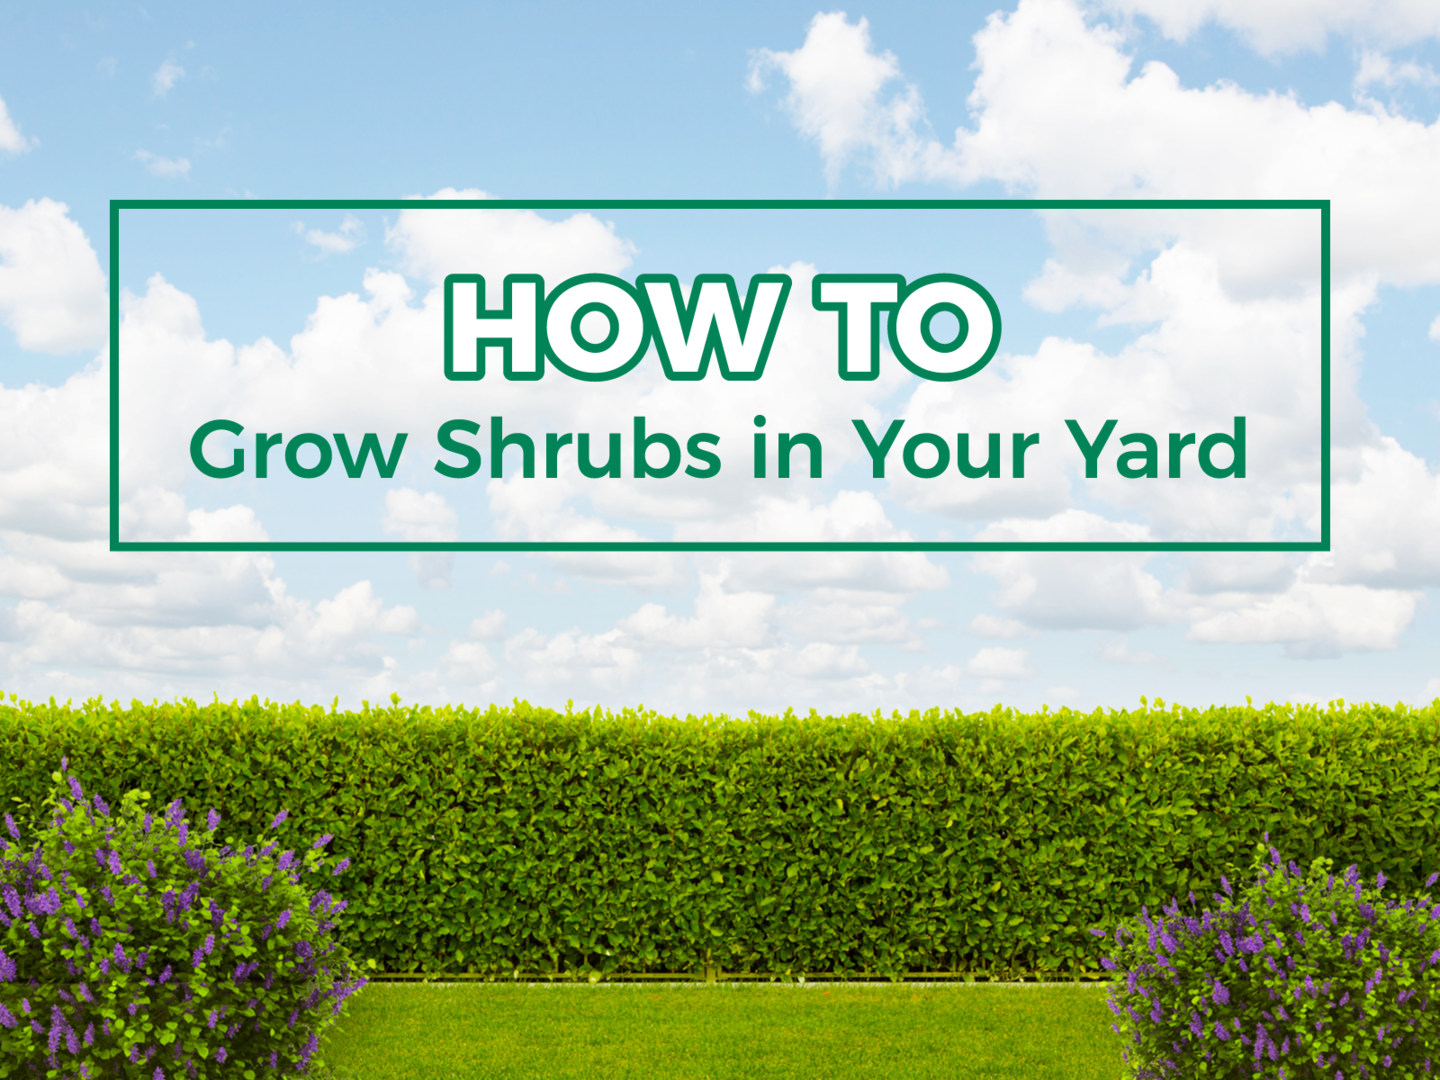 "How to grow shrubs in your yard."